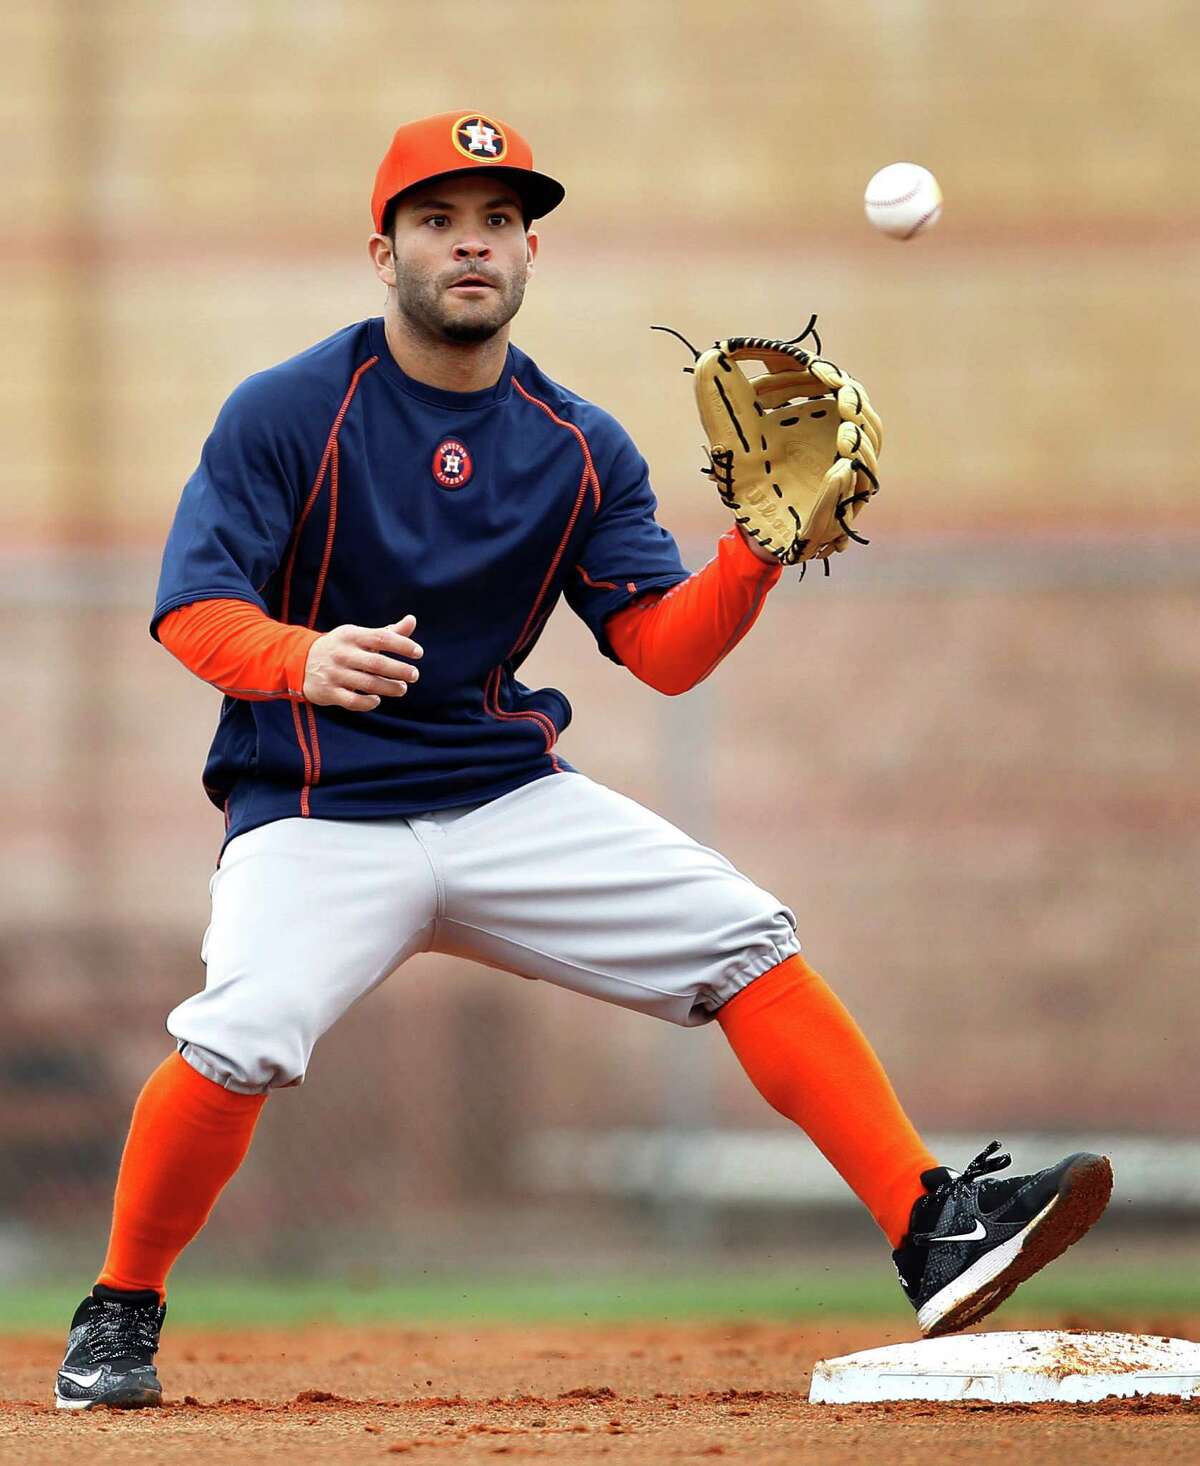 Astros' star Altuve searching for more in 2015